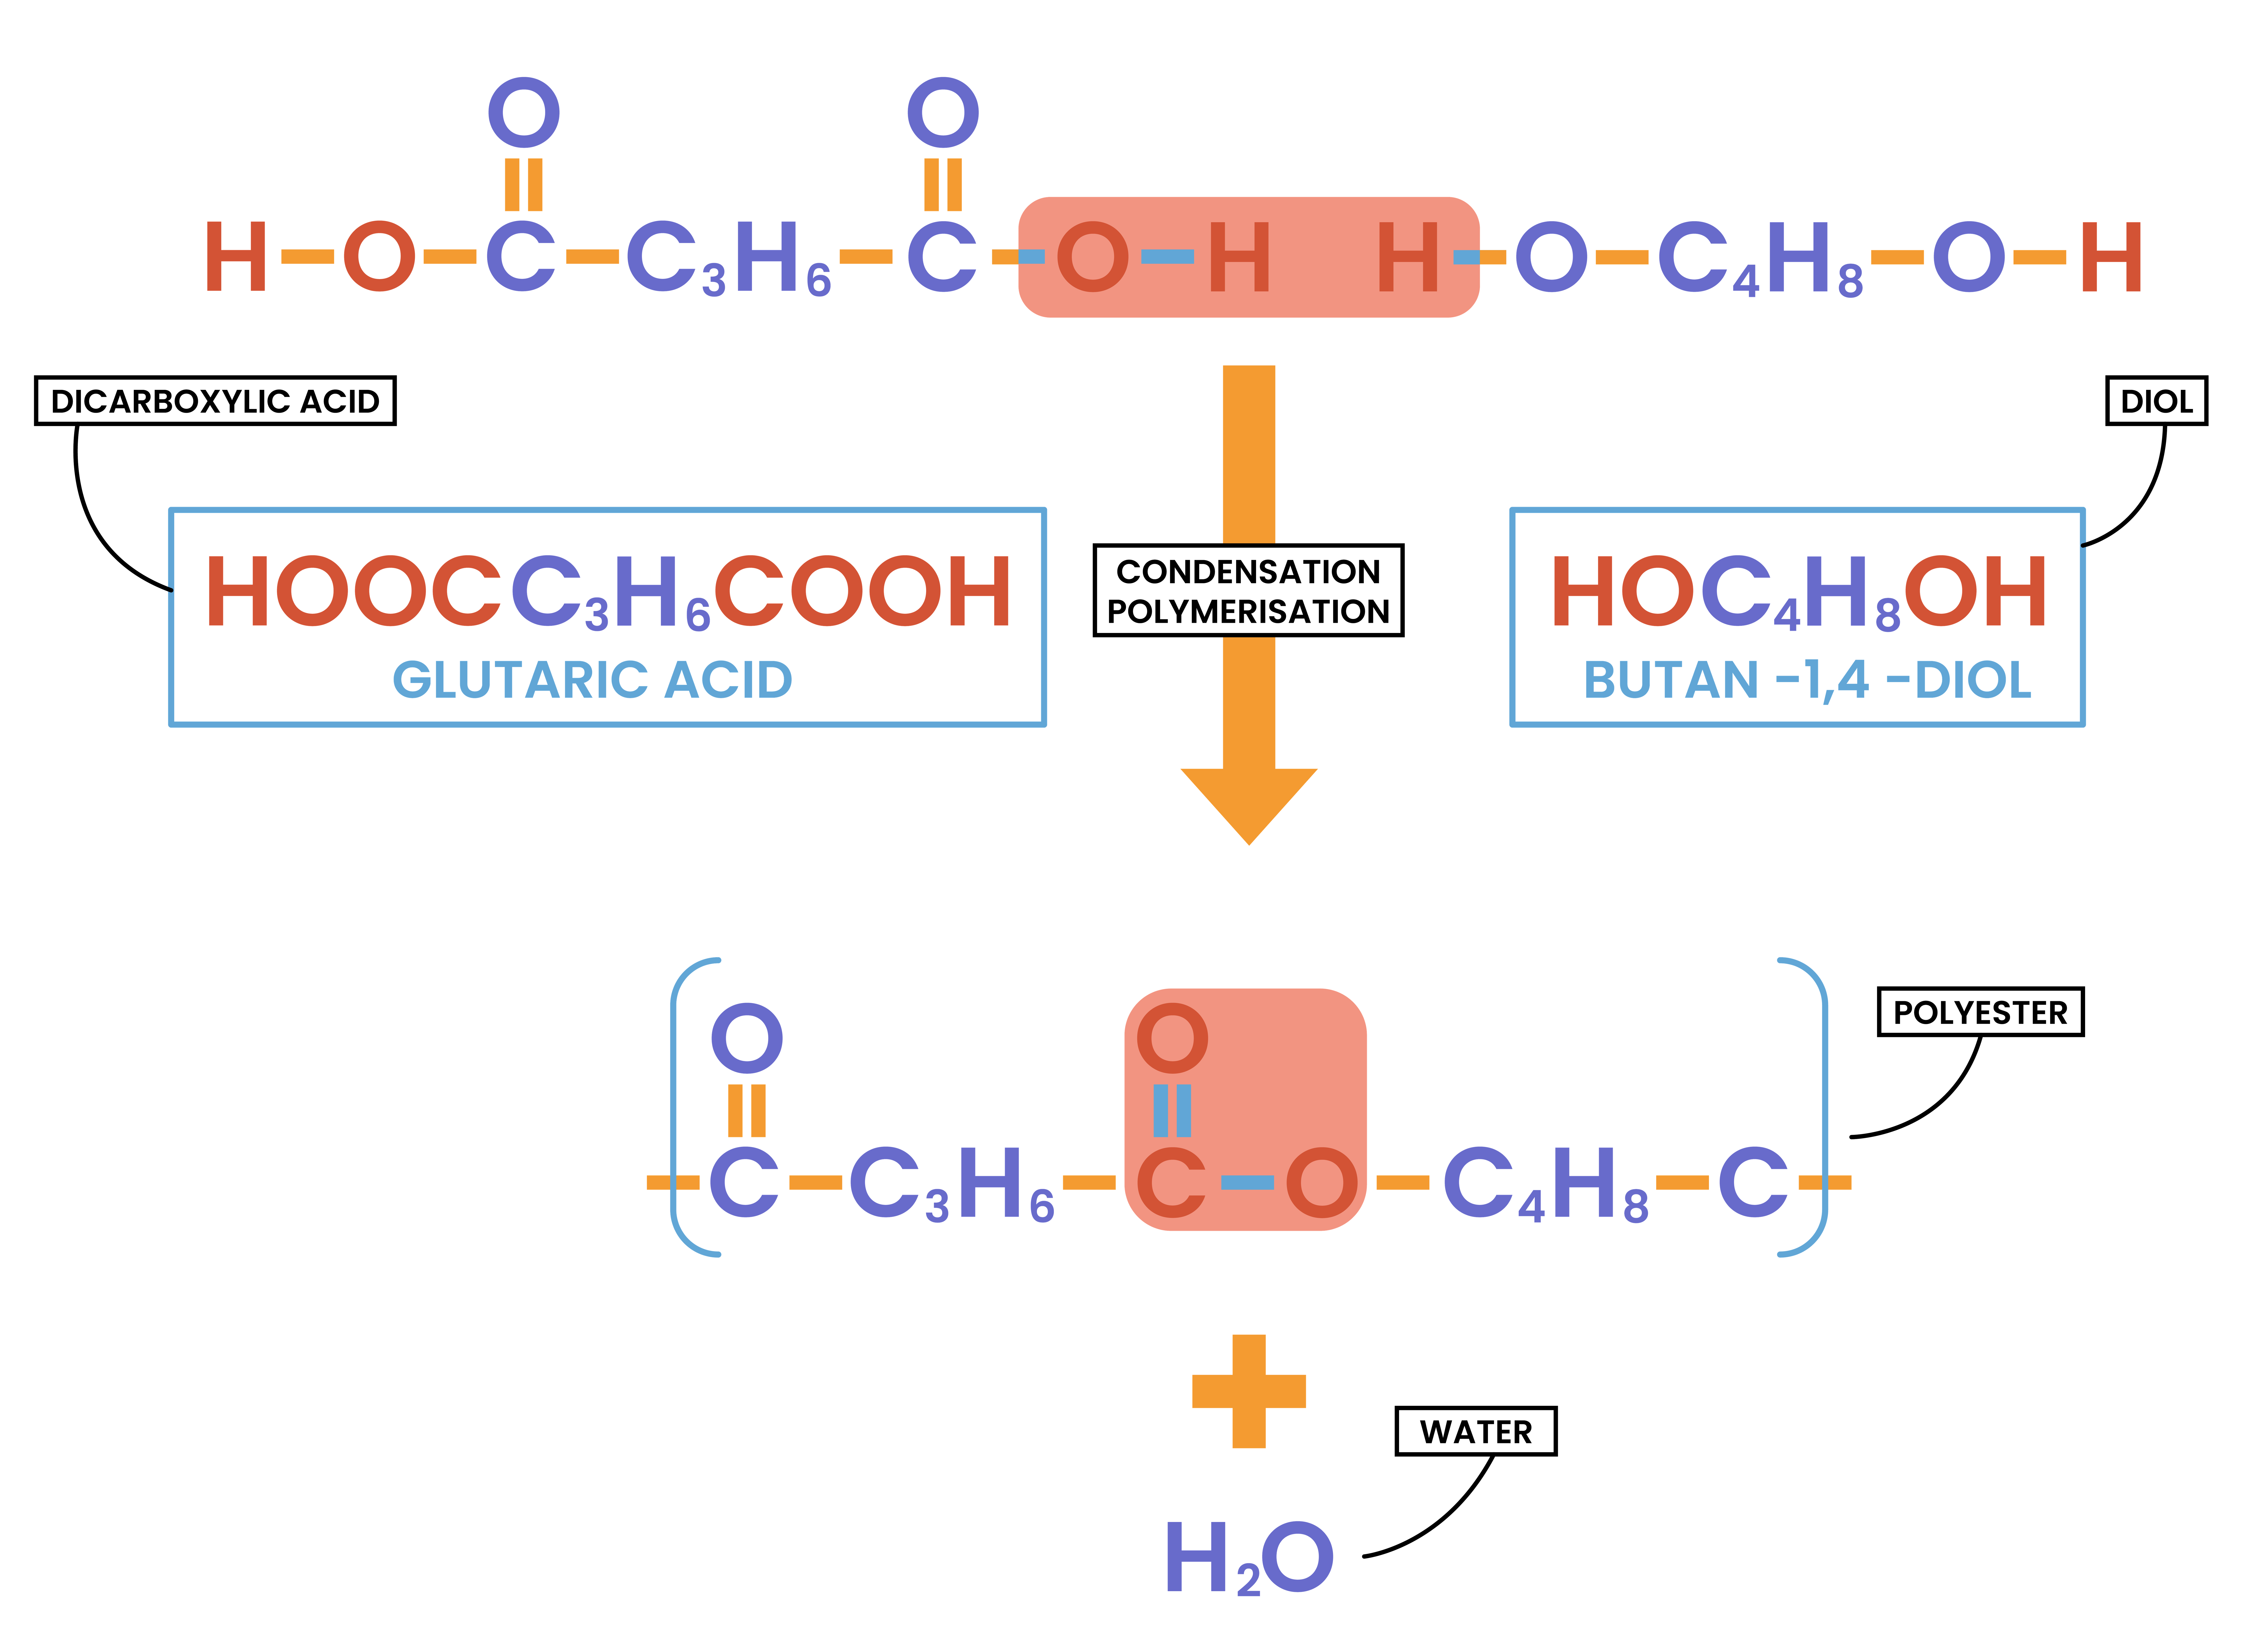 edexcel_igcse_chemistry_topic 28_synthetic polymers_004_condensation polymer formation diagram